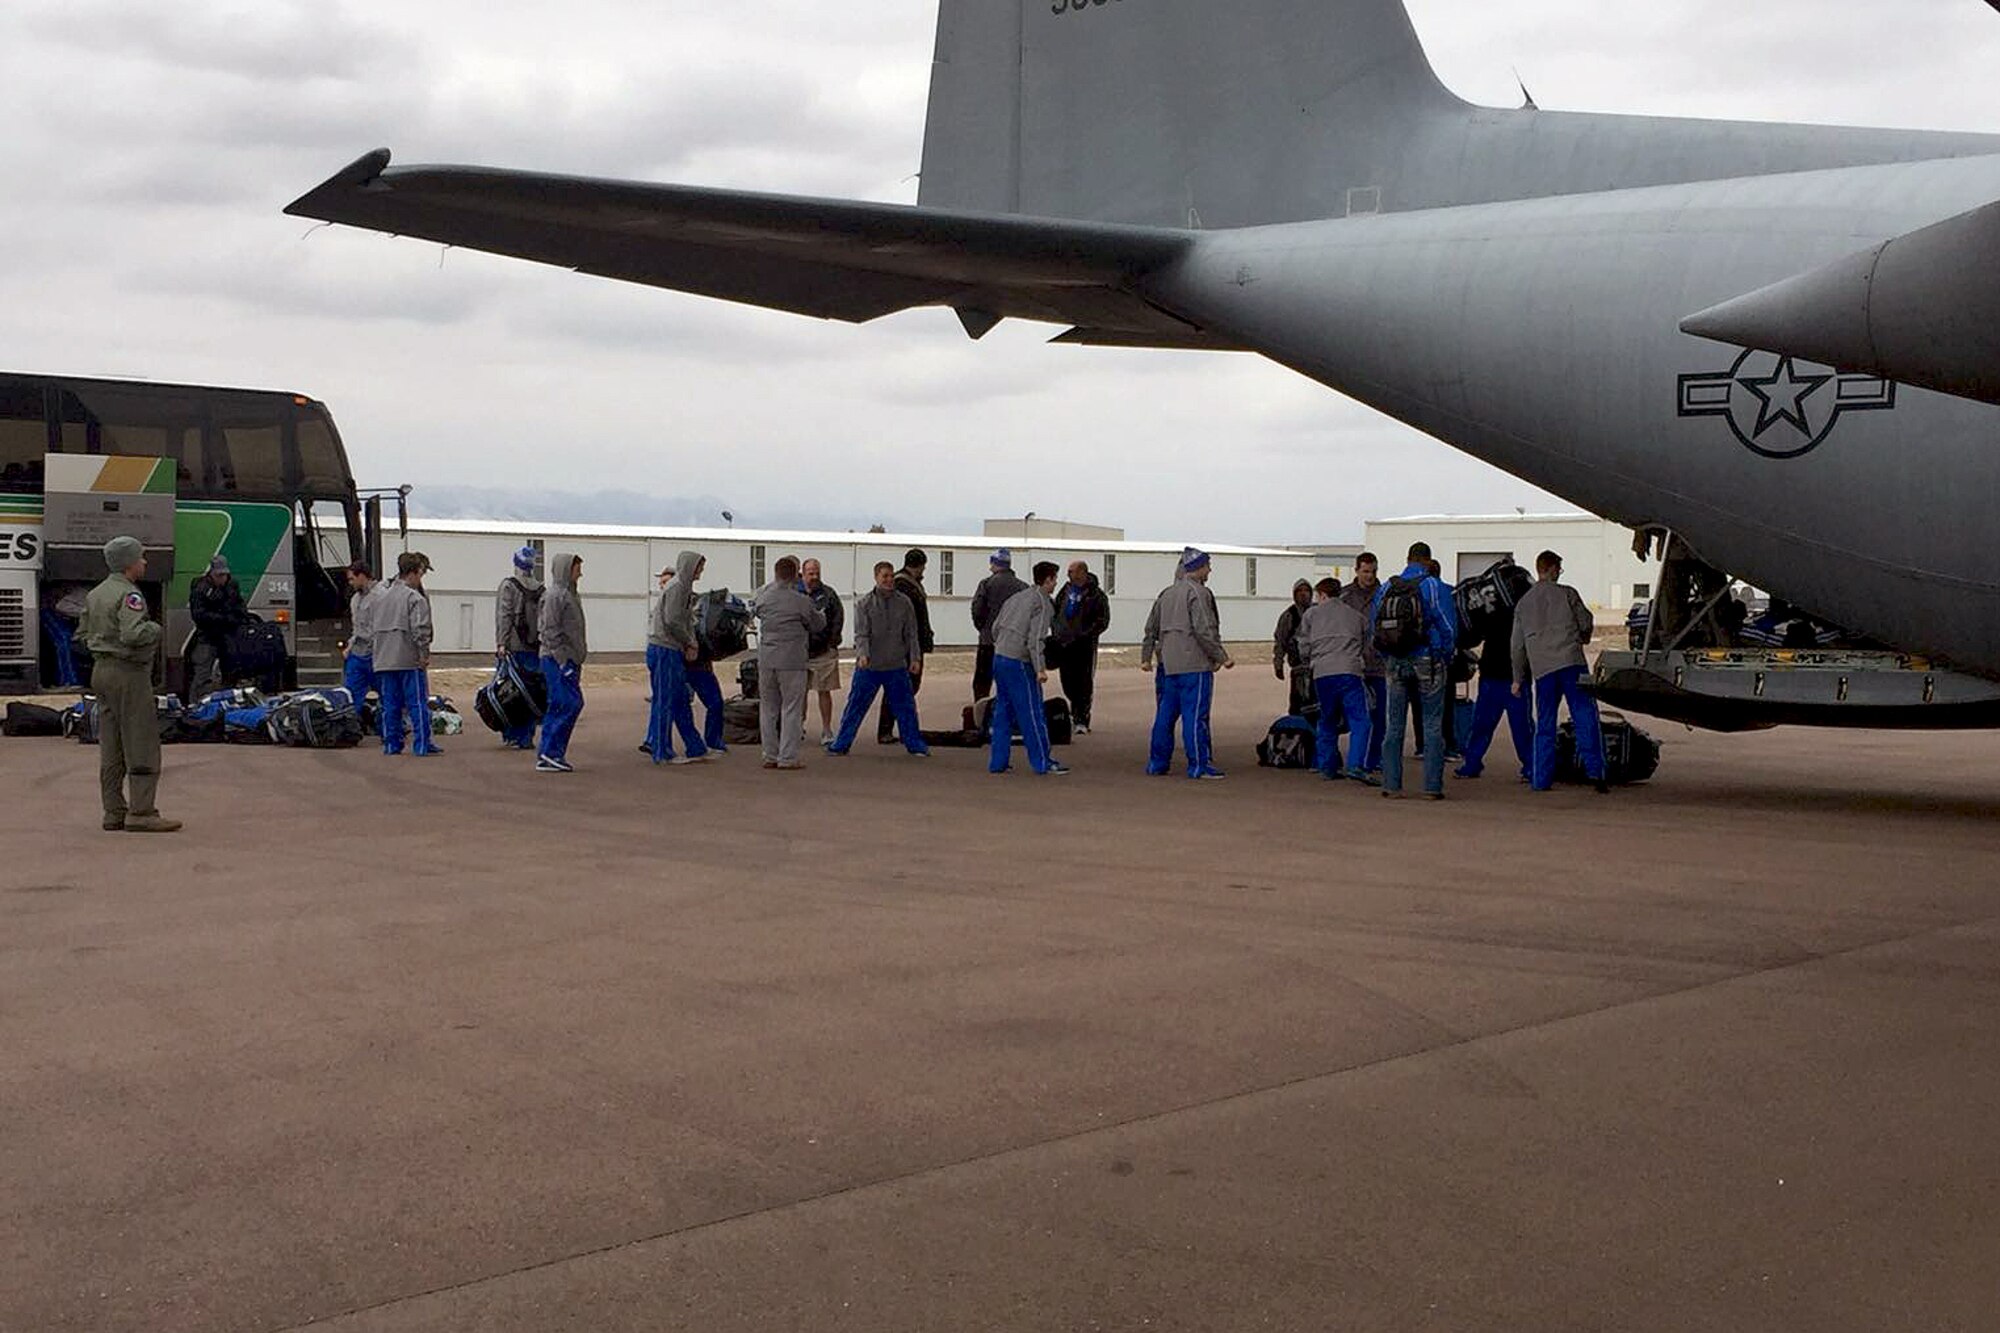 U.S. airmen of the 156th Operations Group, Puerto Rico Air National Guard, provide airlift transport on a WC-130 Hercules aircraft to the U.S. Air Force Academy ice hockey team from Rochester, N.Y. to Colorado Springs, Colo., Mar 19. As a unified team, the PRANG aircrew along with 47 Air Force Falcons team players and team personnel jointly loaded 3,000 pounds of hockey team equipment on the WC-130 for their 4 hours and 25 minutes flight to Colorado Spring. (U.S. Air National Guard photo by Maj. Luis Martinez)